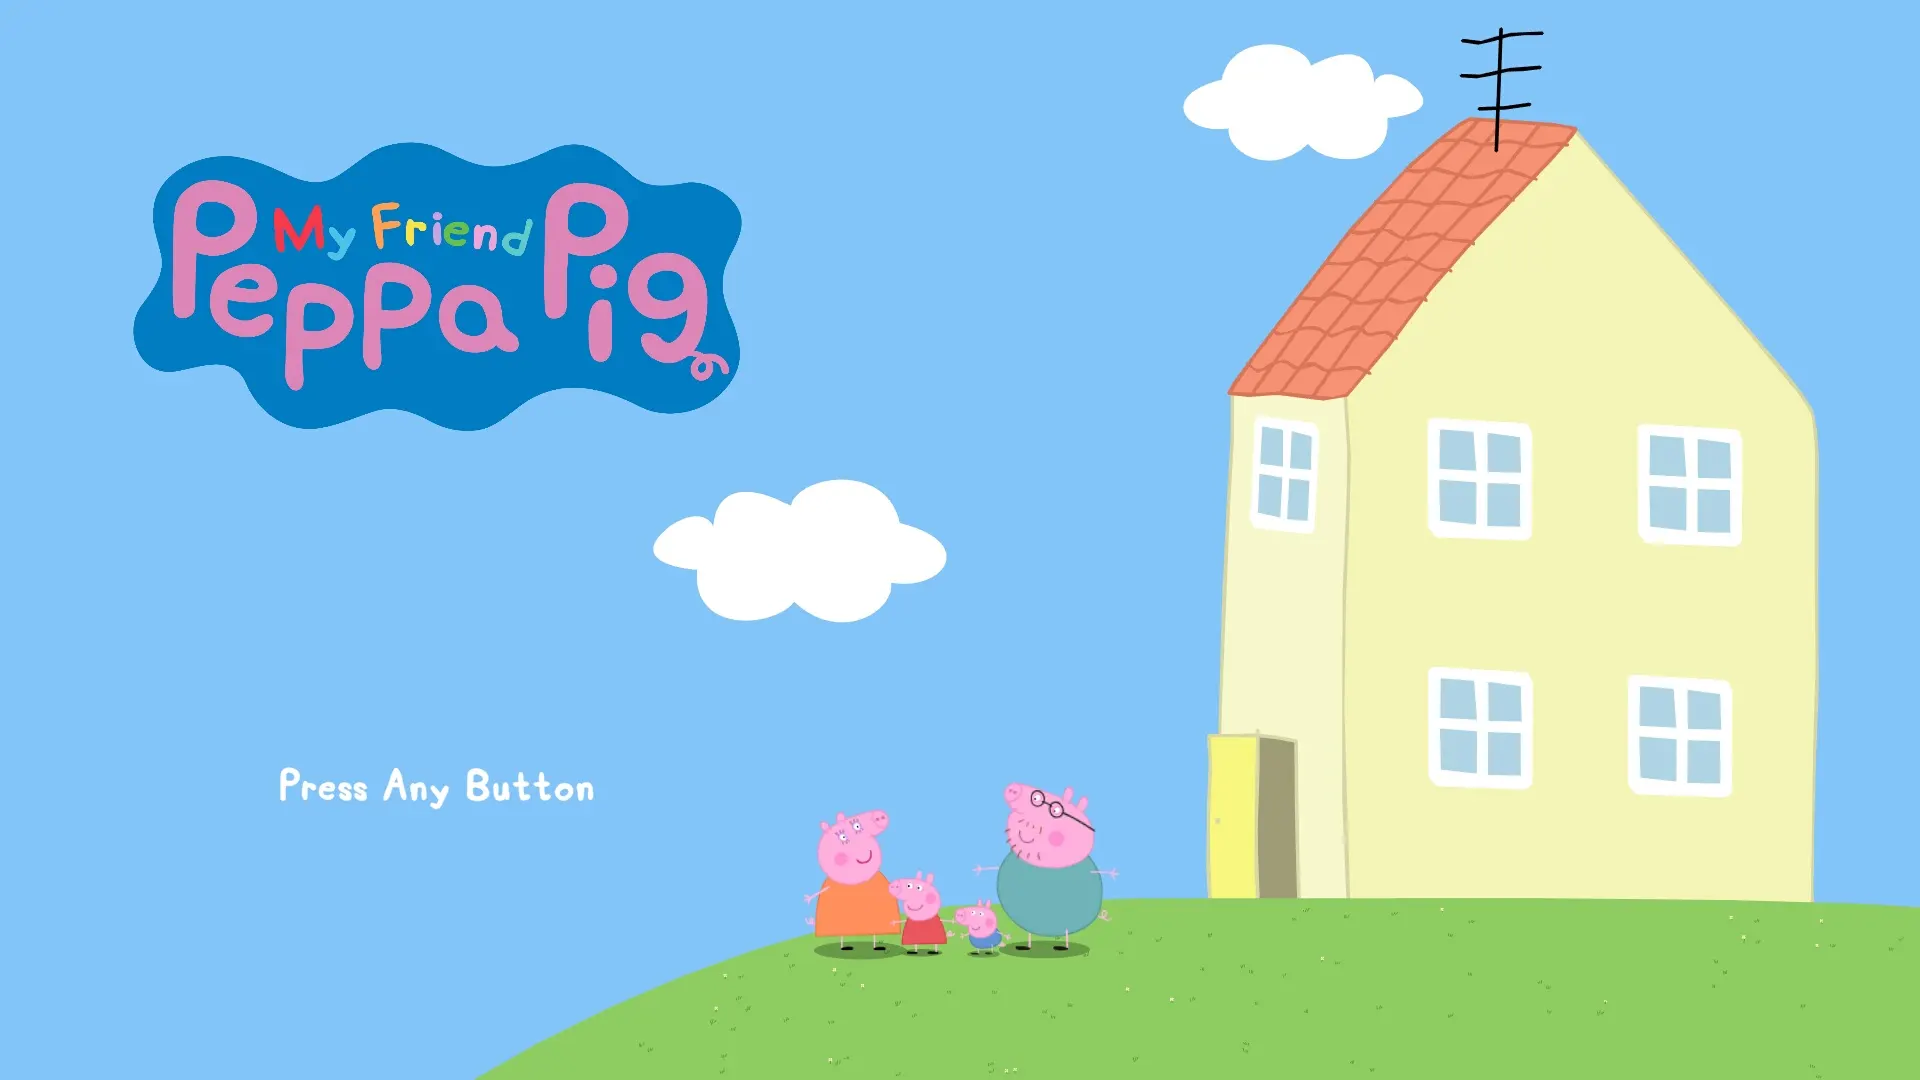 Peppa Pig Press Any Button